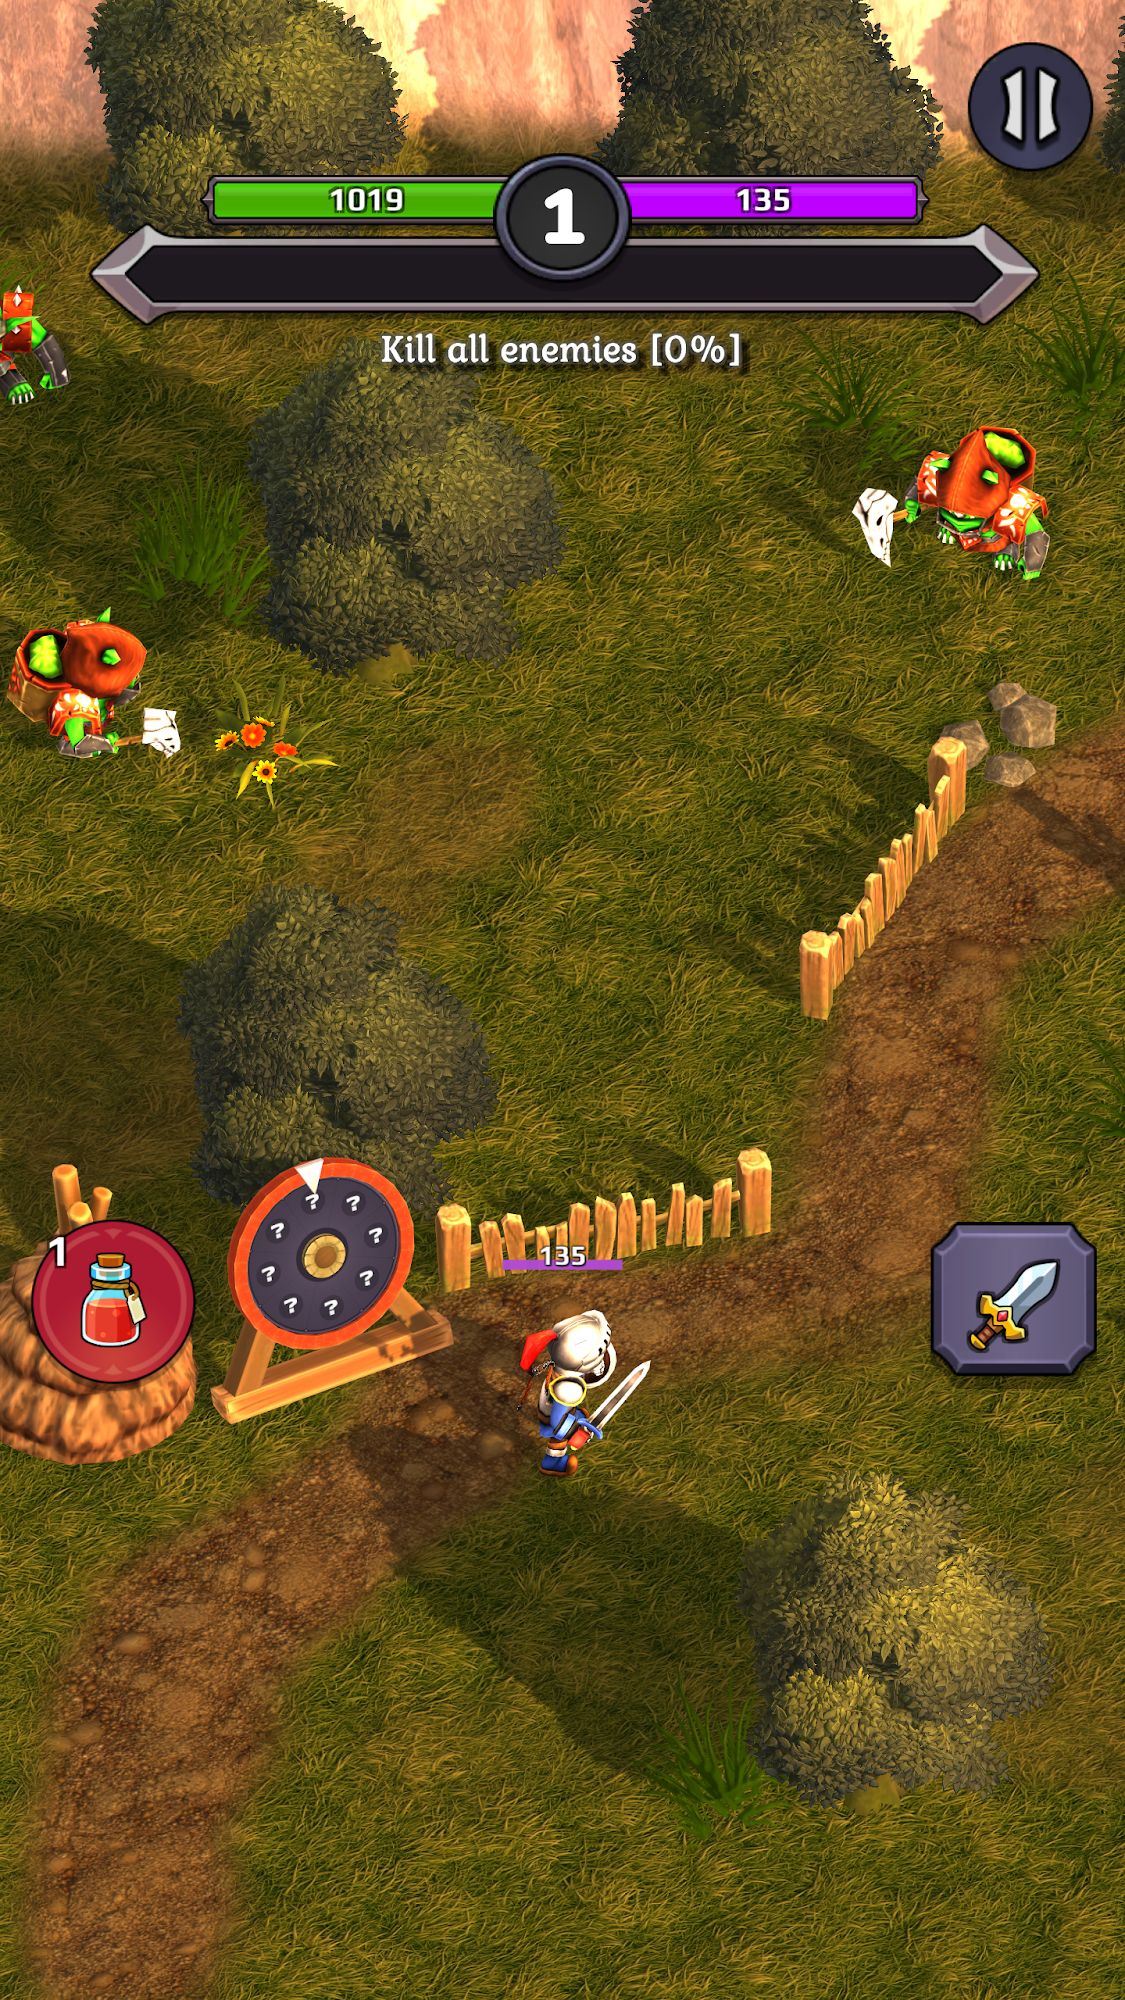 Full version of Android Offline game apk Crusado: Heroes Roguelike RPG for tablet and phone.